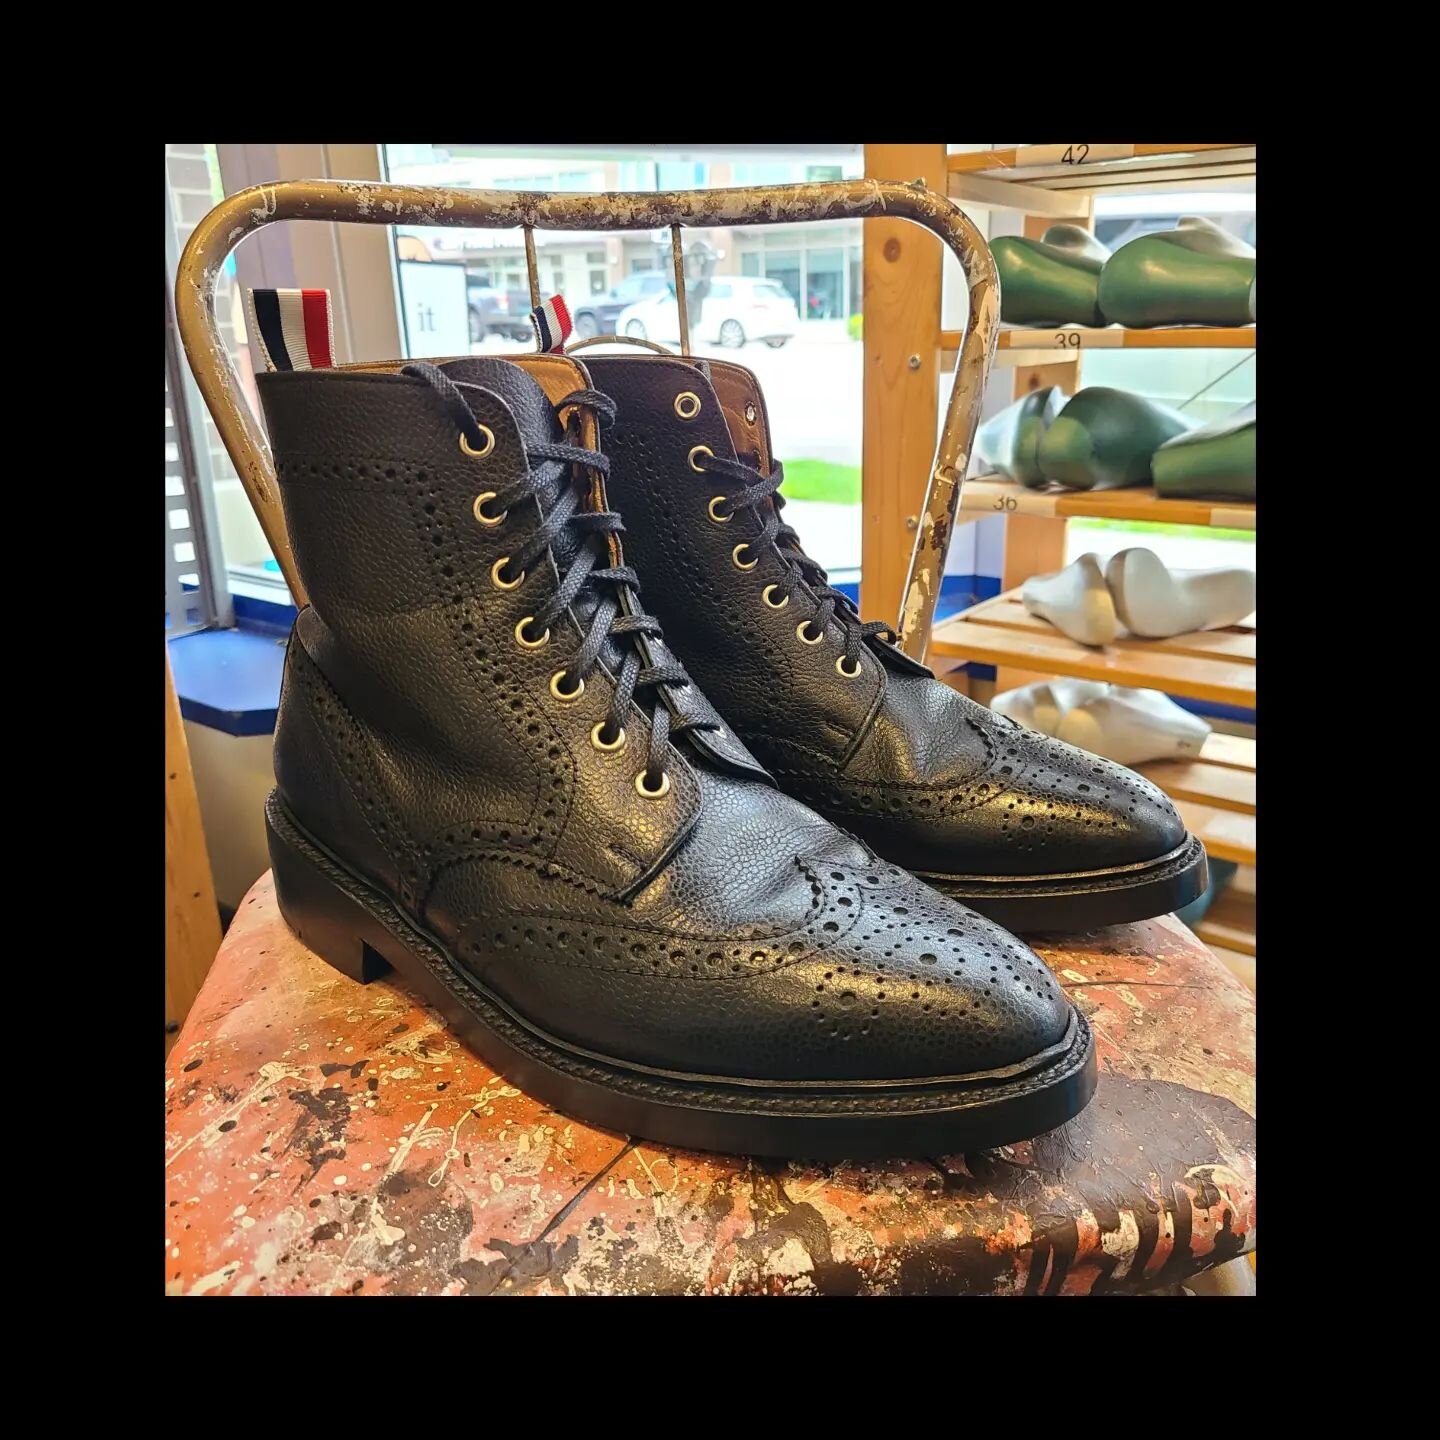 A complete resole on these @thombrowne boots. Such a cool and unique pair. Awesome pebble grained leather, double thick leather sole with a Topy Elisee Protection layer, signature pull tabs, metal toe plates and more! Such a cool pair. 

@thombrowne 